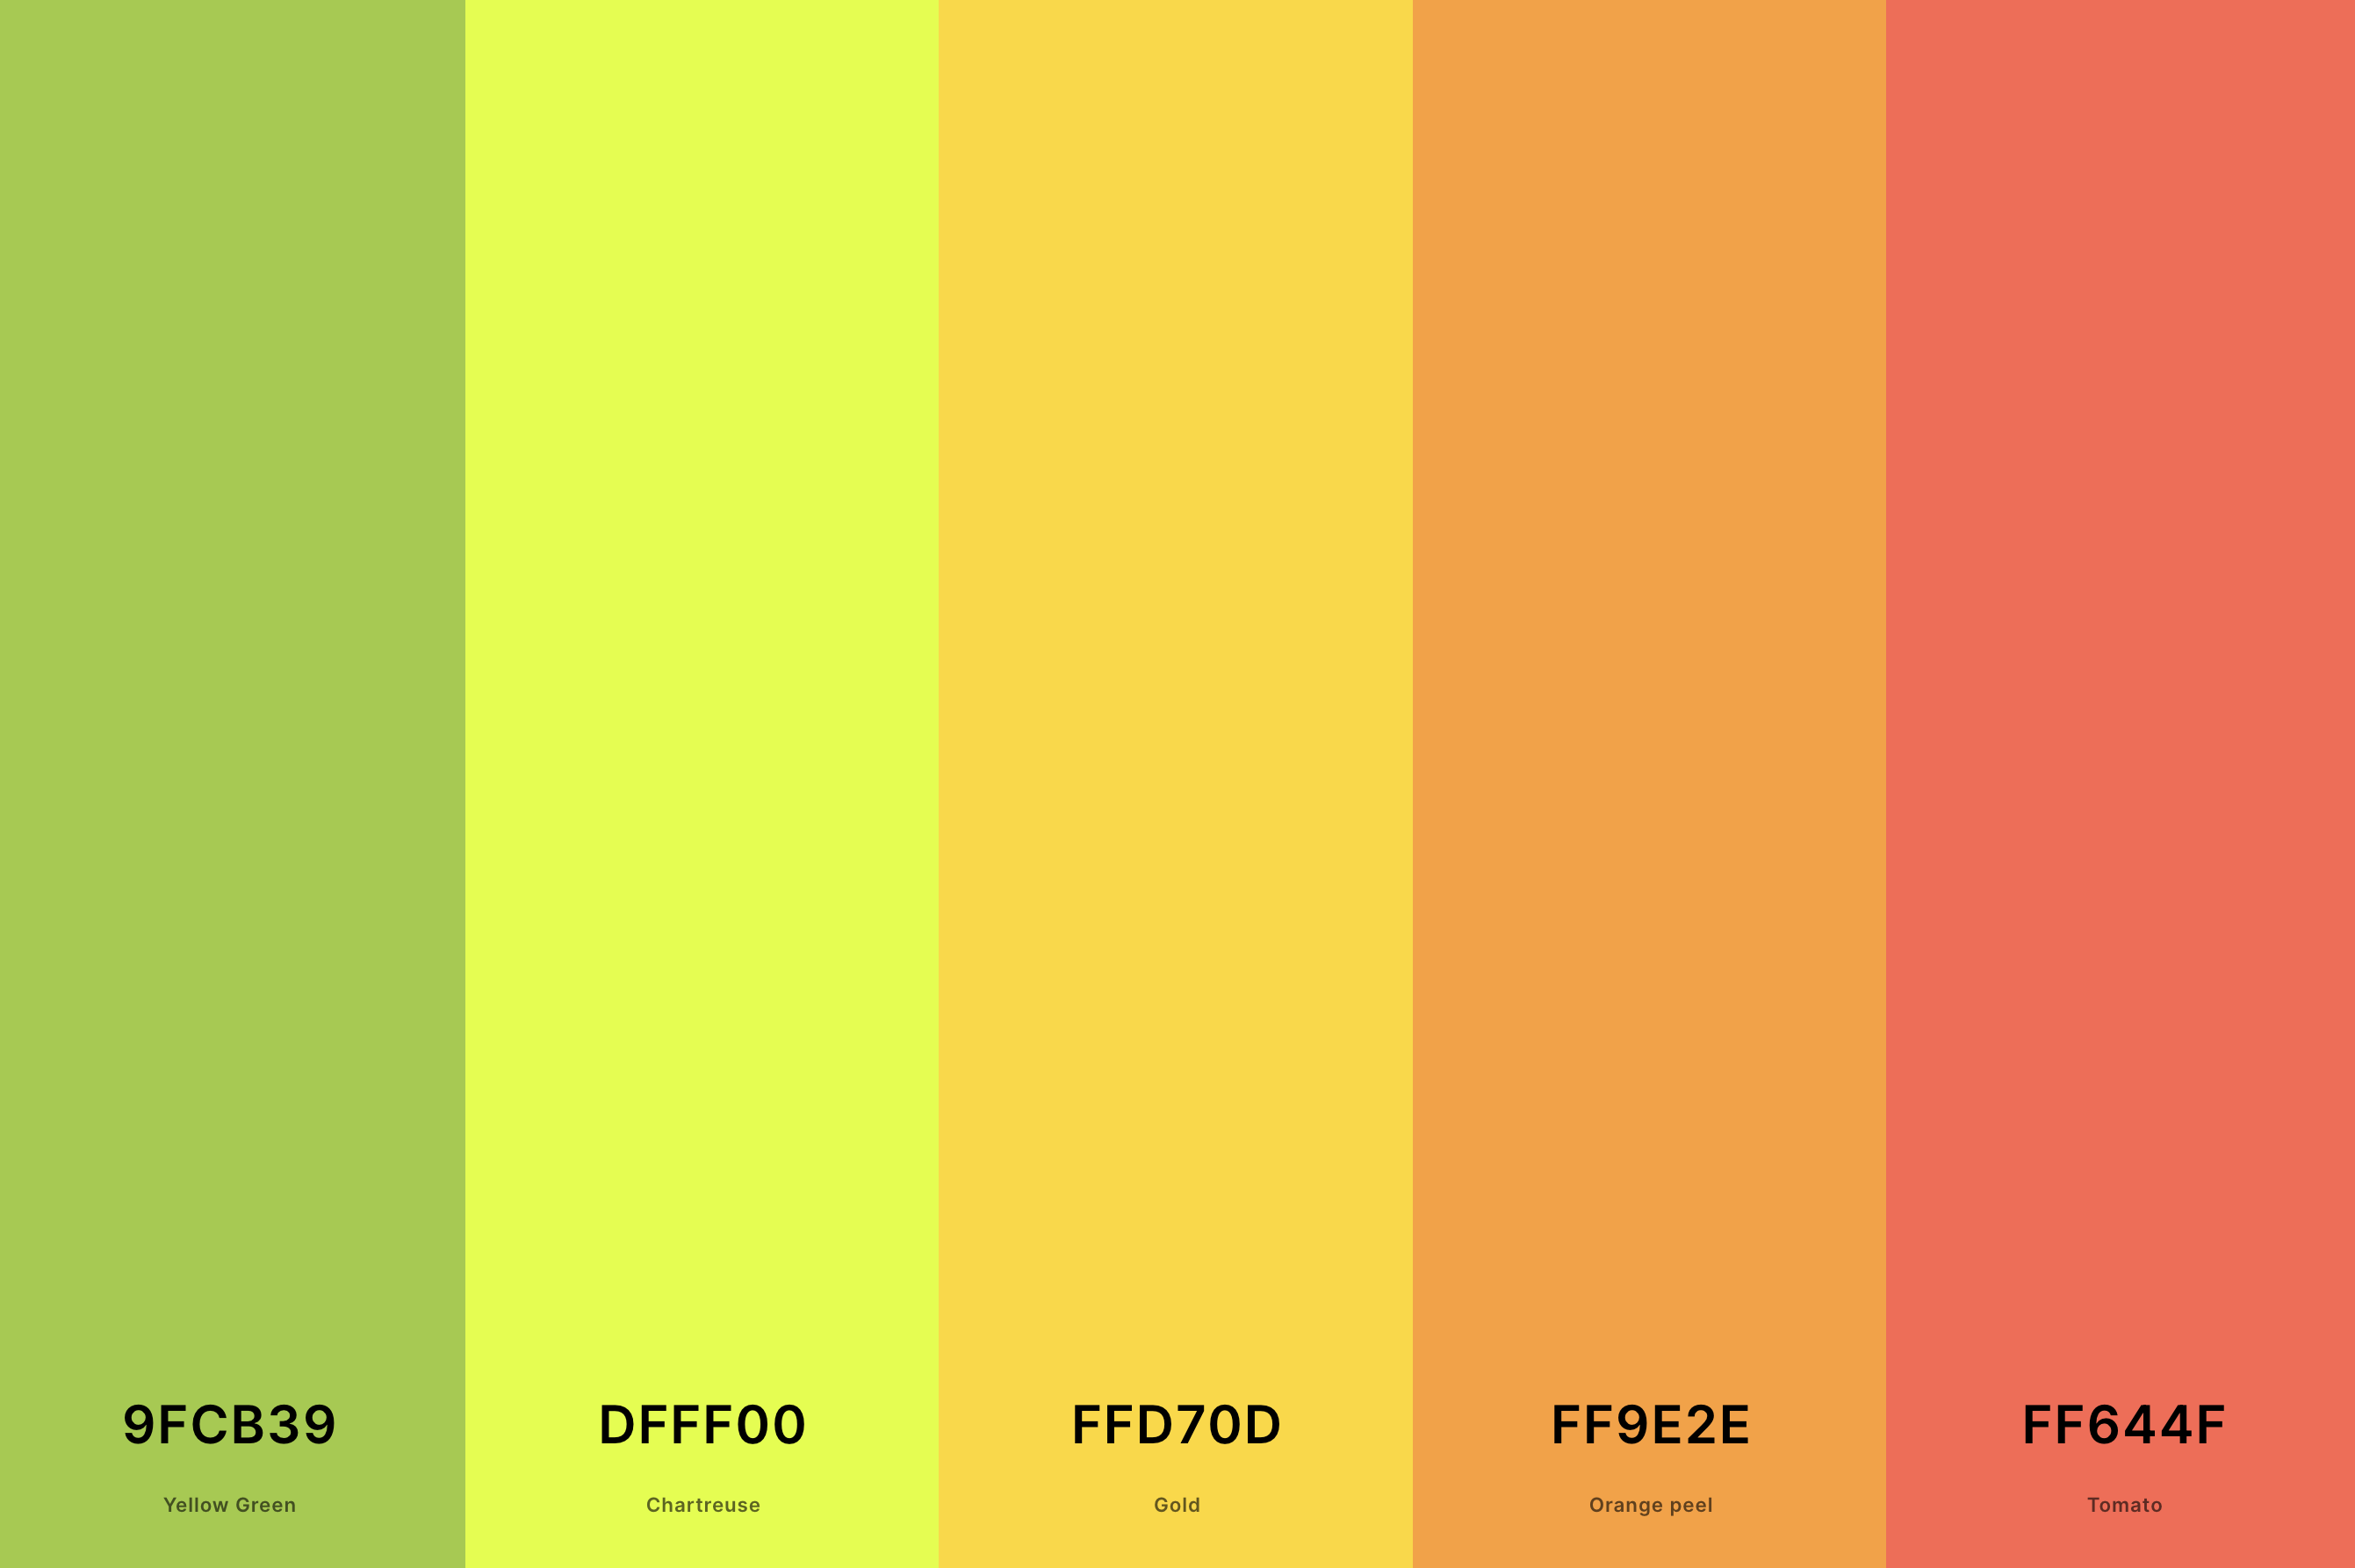 22. Chartreuse And Coral Color Palettes Color Palette with Yellow Green (Hex #9FCB39) + Chartreuse (Hex #DFFF00) + Gold (Hex #FFD70D) + Orange Peel (Hex #FF9E2E) + Tomato (Hex #FF644F) Color Palette with Hex Codes